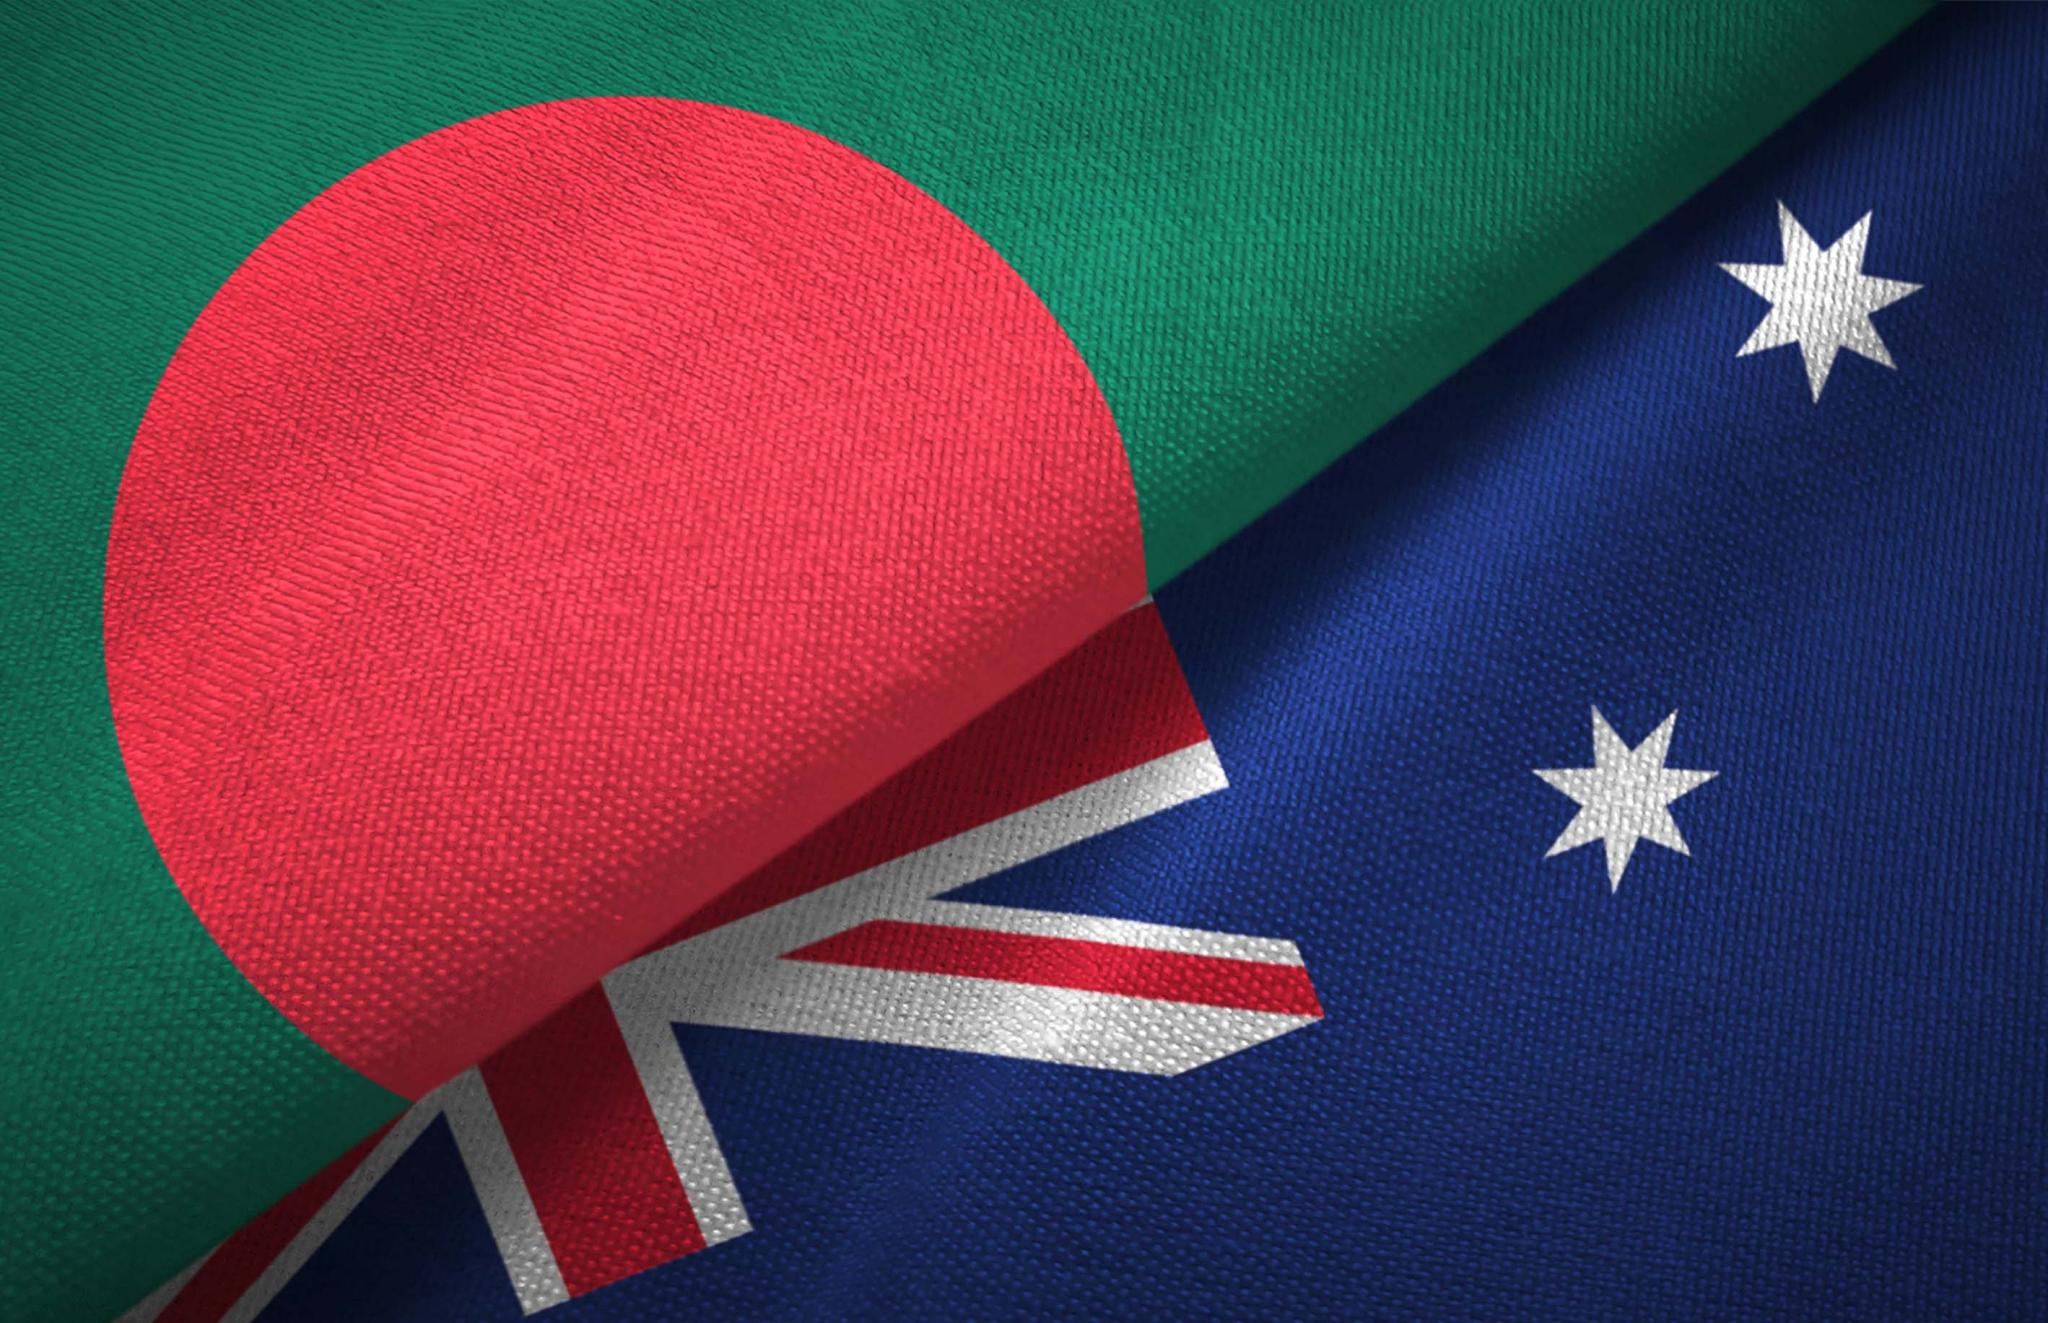 Bangladesh and Australia two flags textile cloth, fabric texture by Oleksii on Adobe Stock